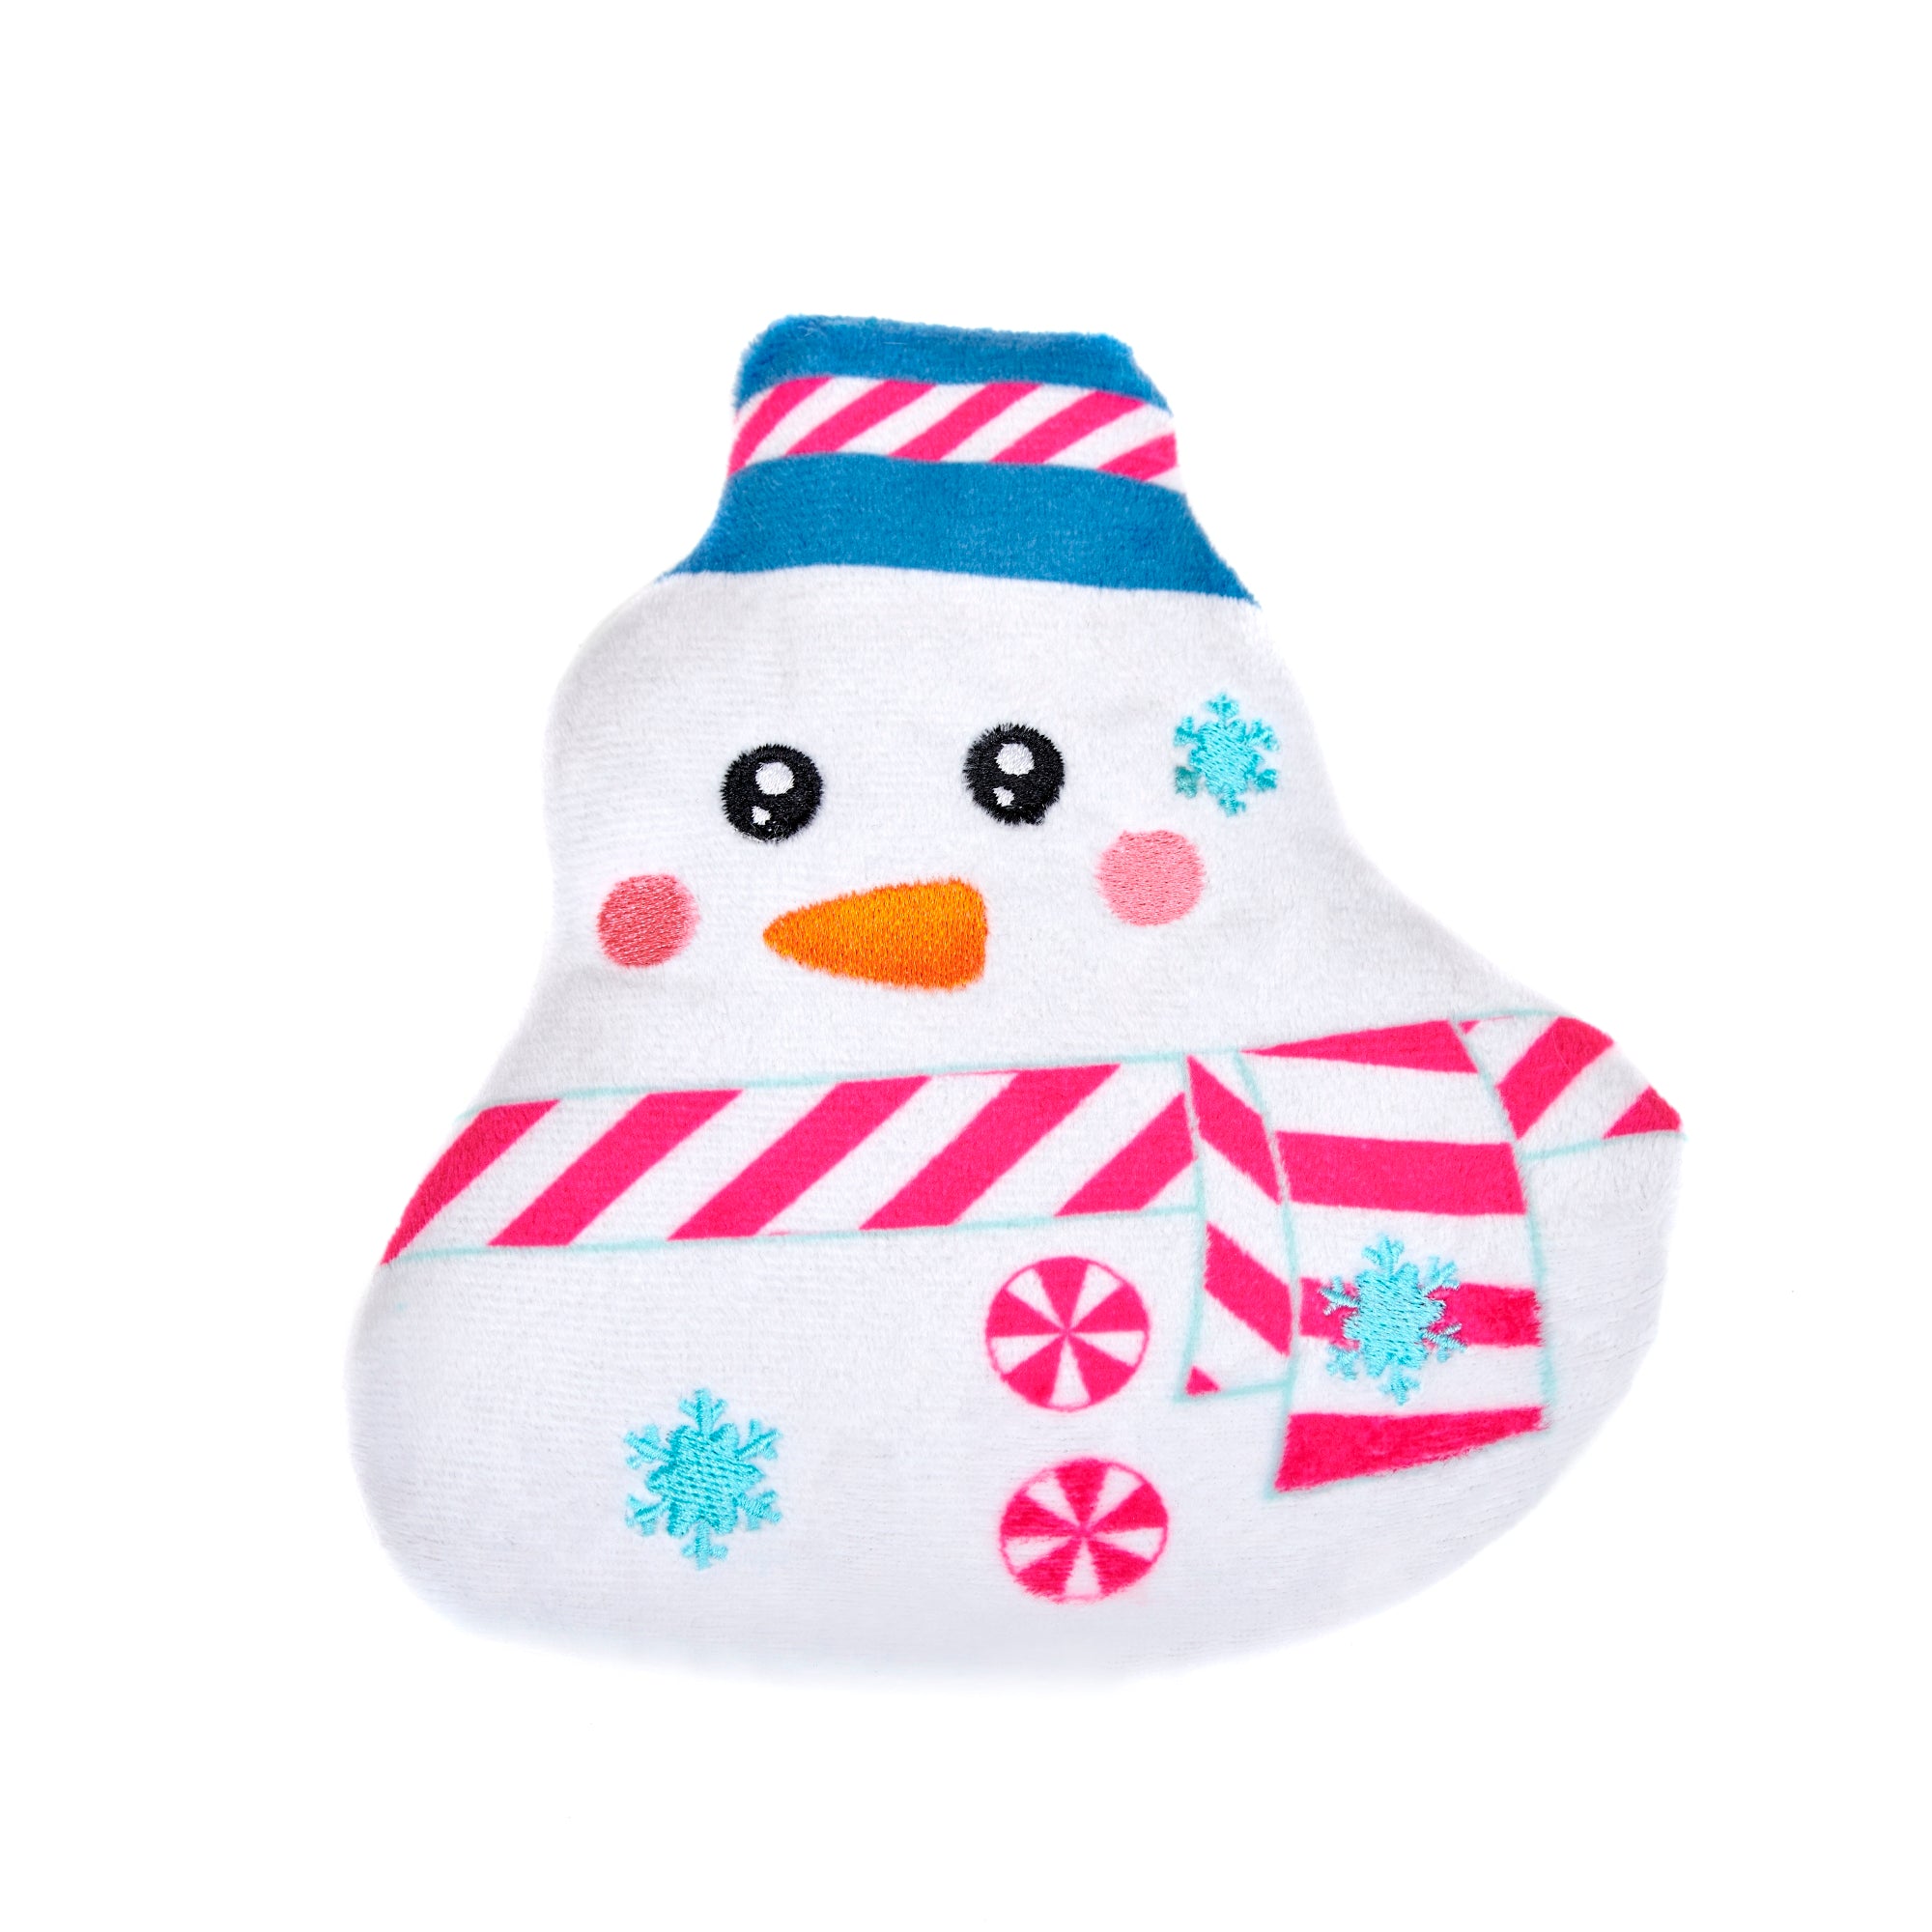 Microwavable Mini Snowman Flat Hottie Heat Pack Scented with Lavender